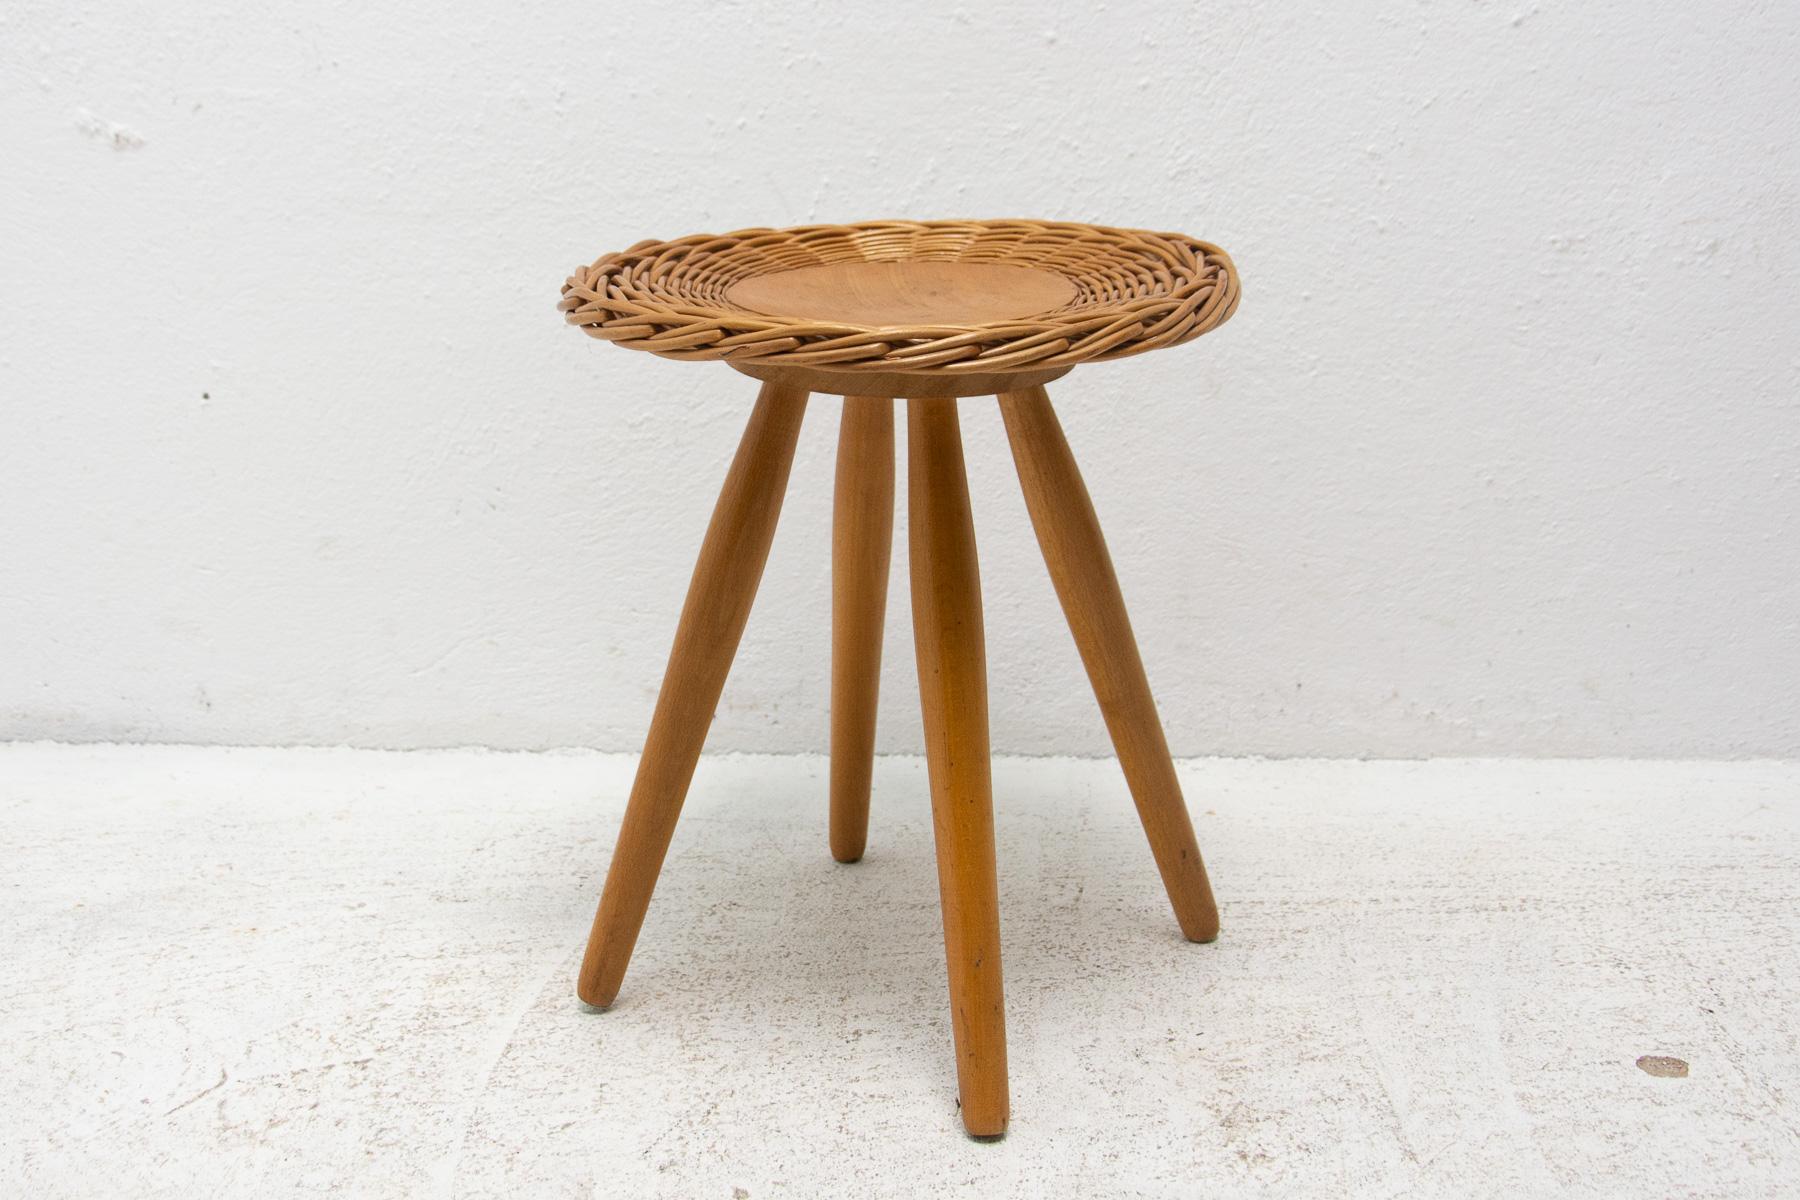 Czechoslovak rattan stool designed by Jan Kalous for ÚLUV in the 1960´s. Very simple and elegant design. In good Vintage condition, bears signs of age and using.

Measures: height: 41 cm

width: 35 cm

depth: 35 cm

seat height : 41 cm.